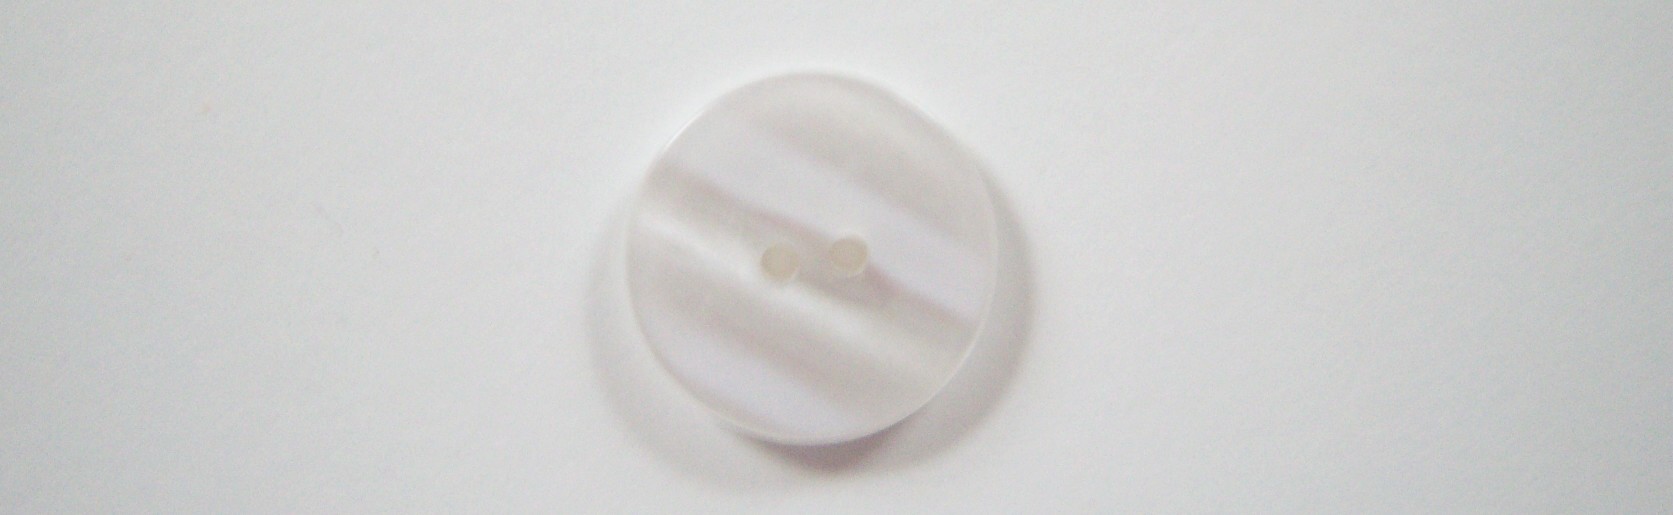 Off White Pearlized 7/8" 4 Hole Button